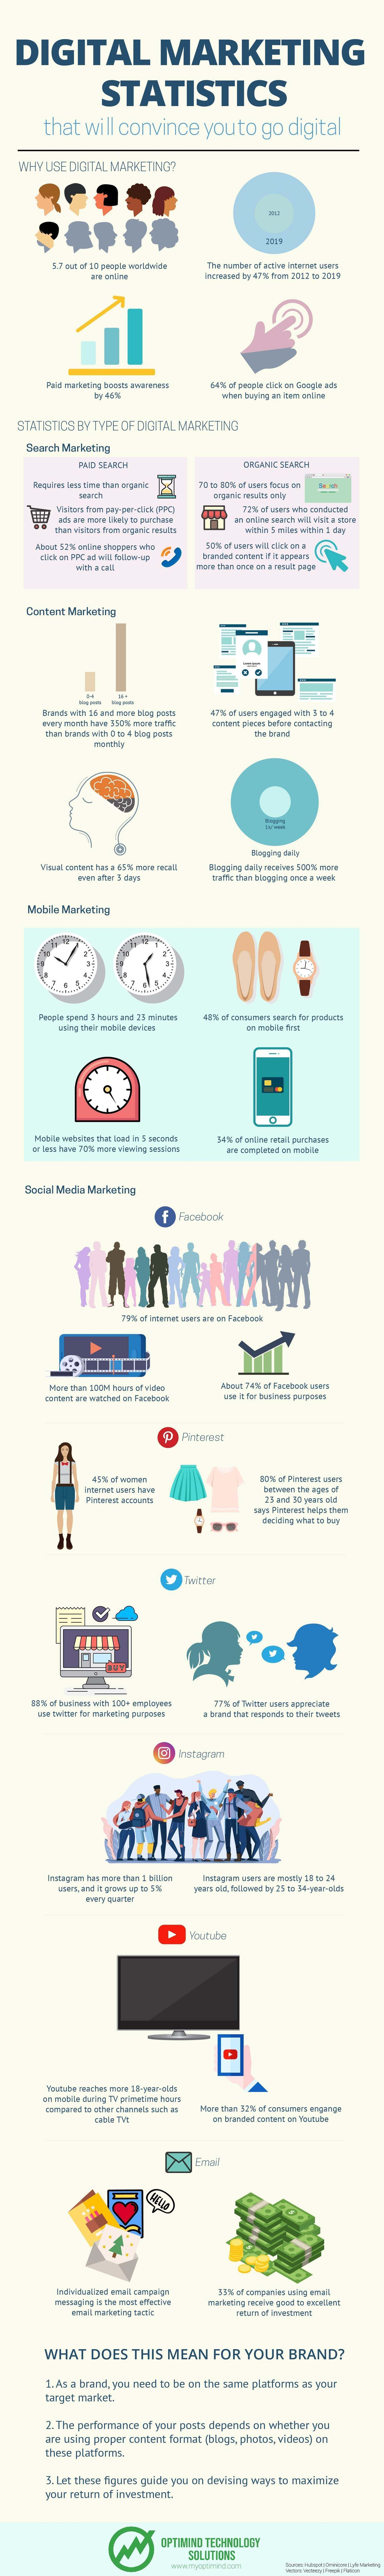 Digital Marketing Statistics That Will Convince You To Go Digital